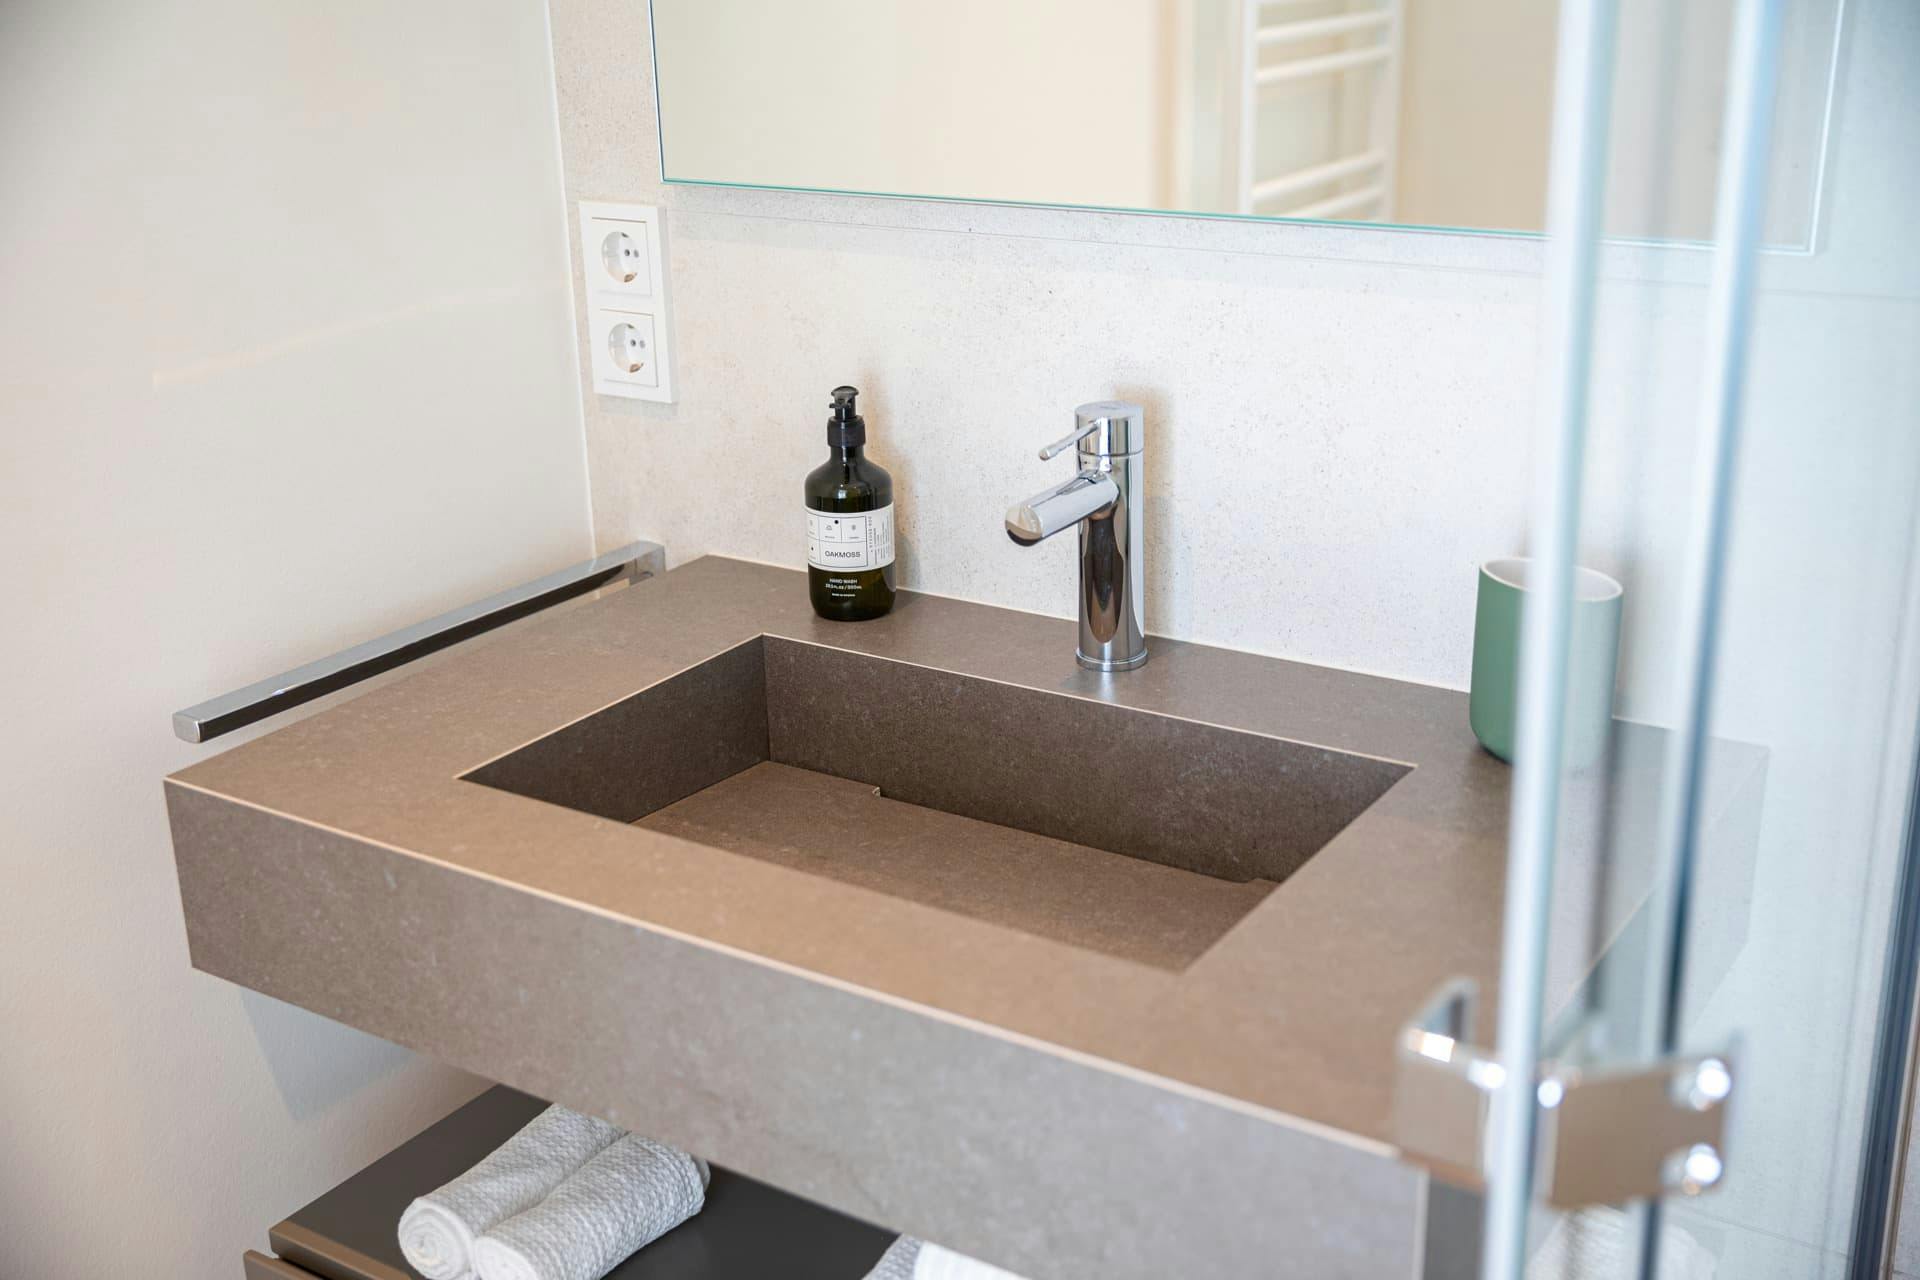 Picture of modern sink with fancy soap and toothbrush holder. The left side features an electric socket.